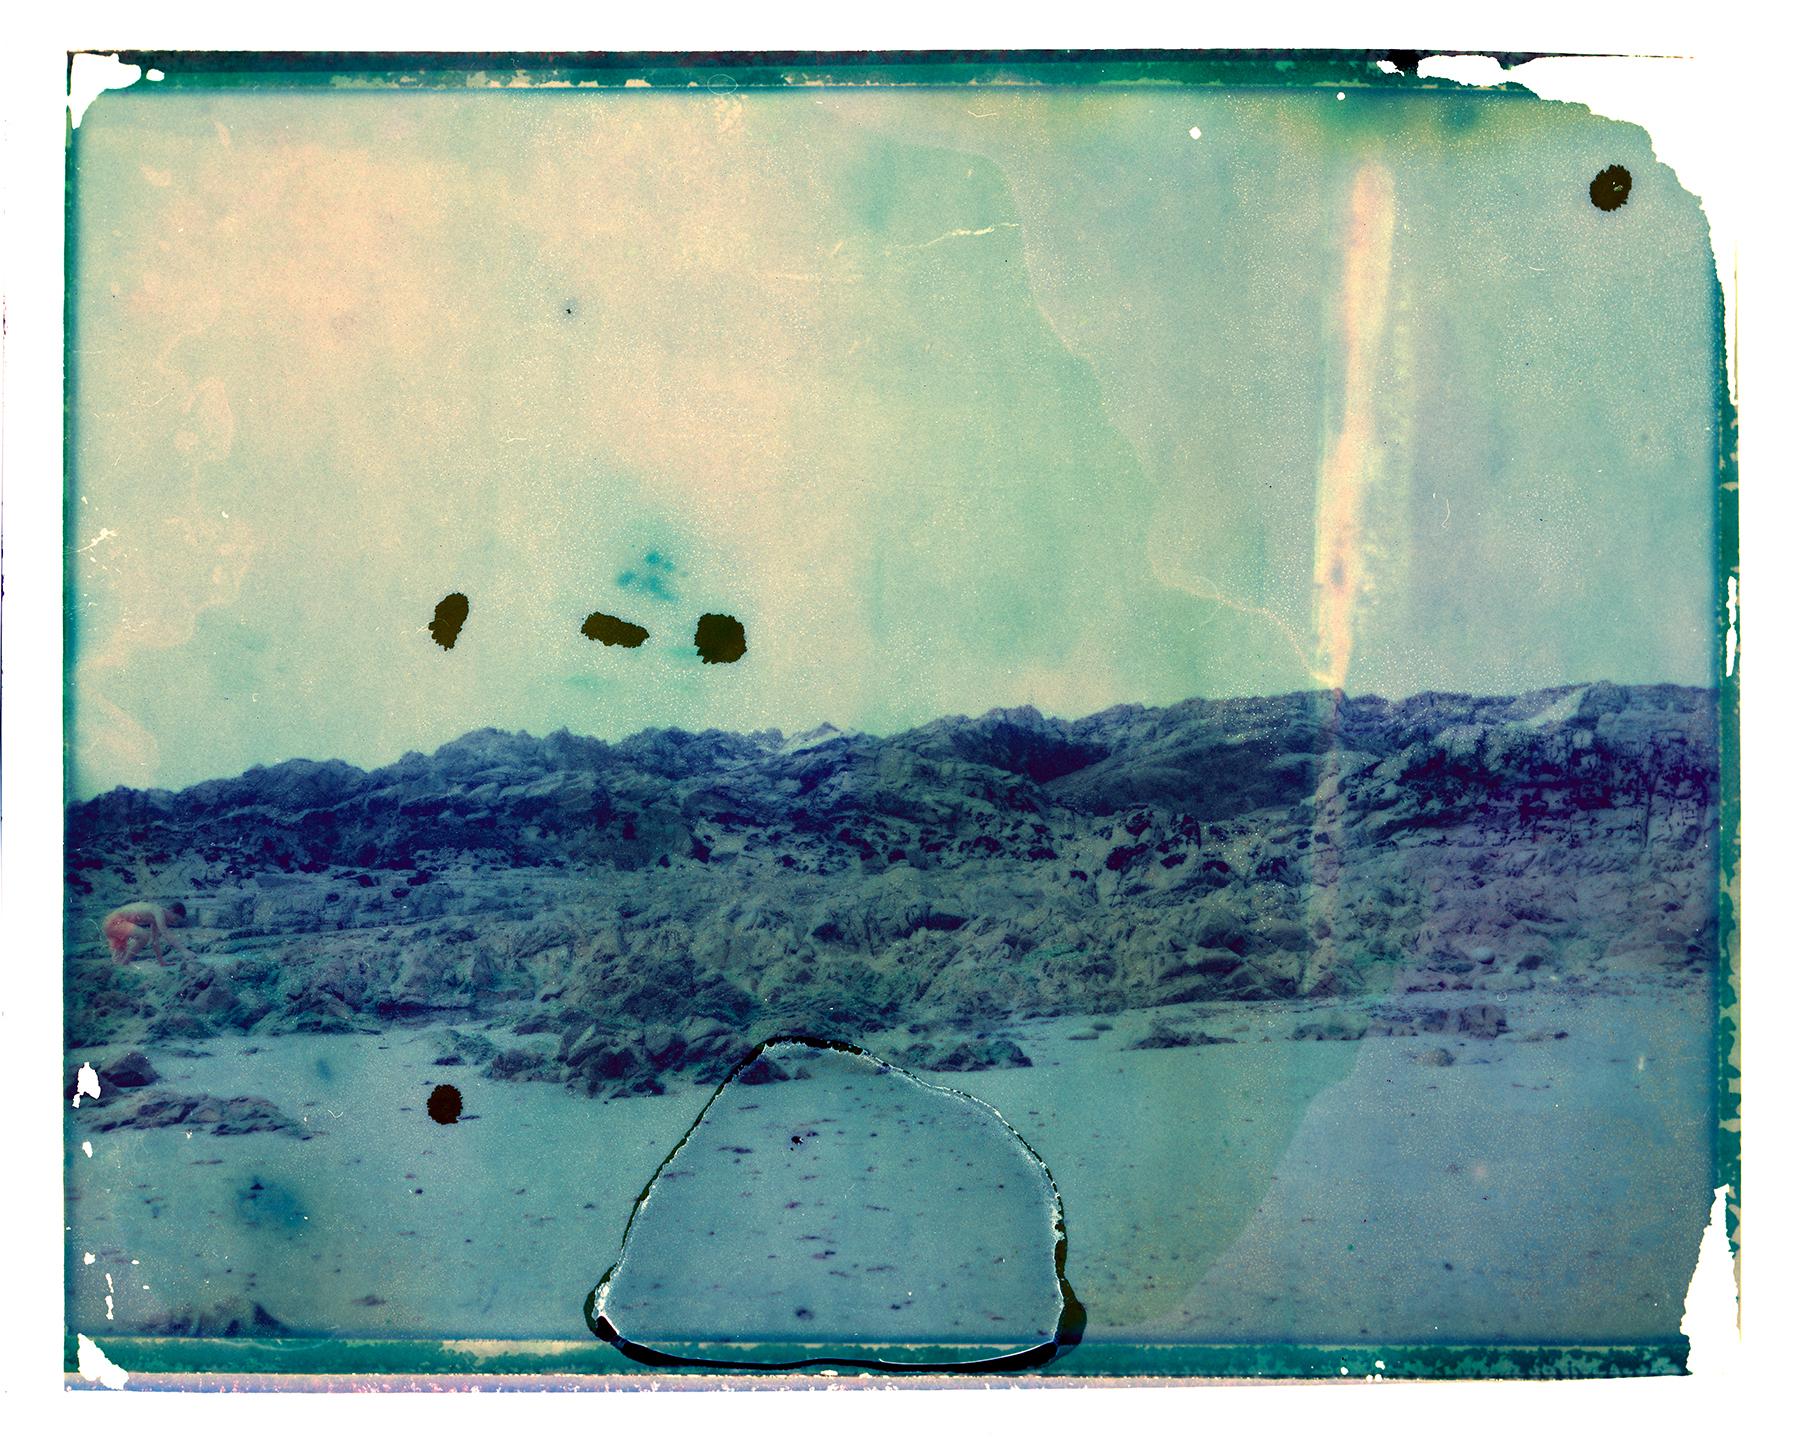 Cristina Fontsare Abstract Photograph - Journey to the center of the Earth - Contemporary, Polaroid, Childhood